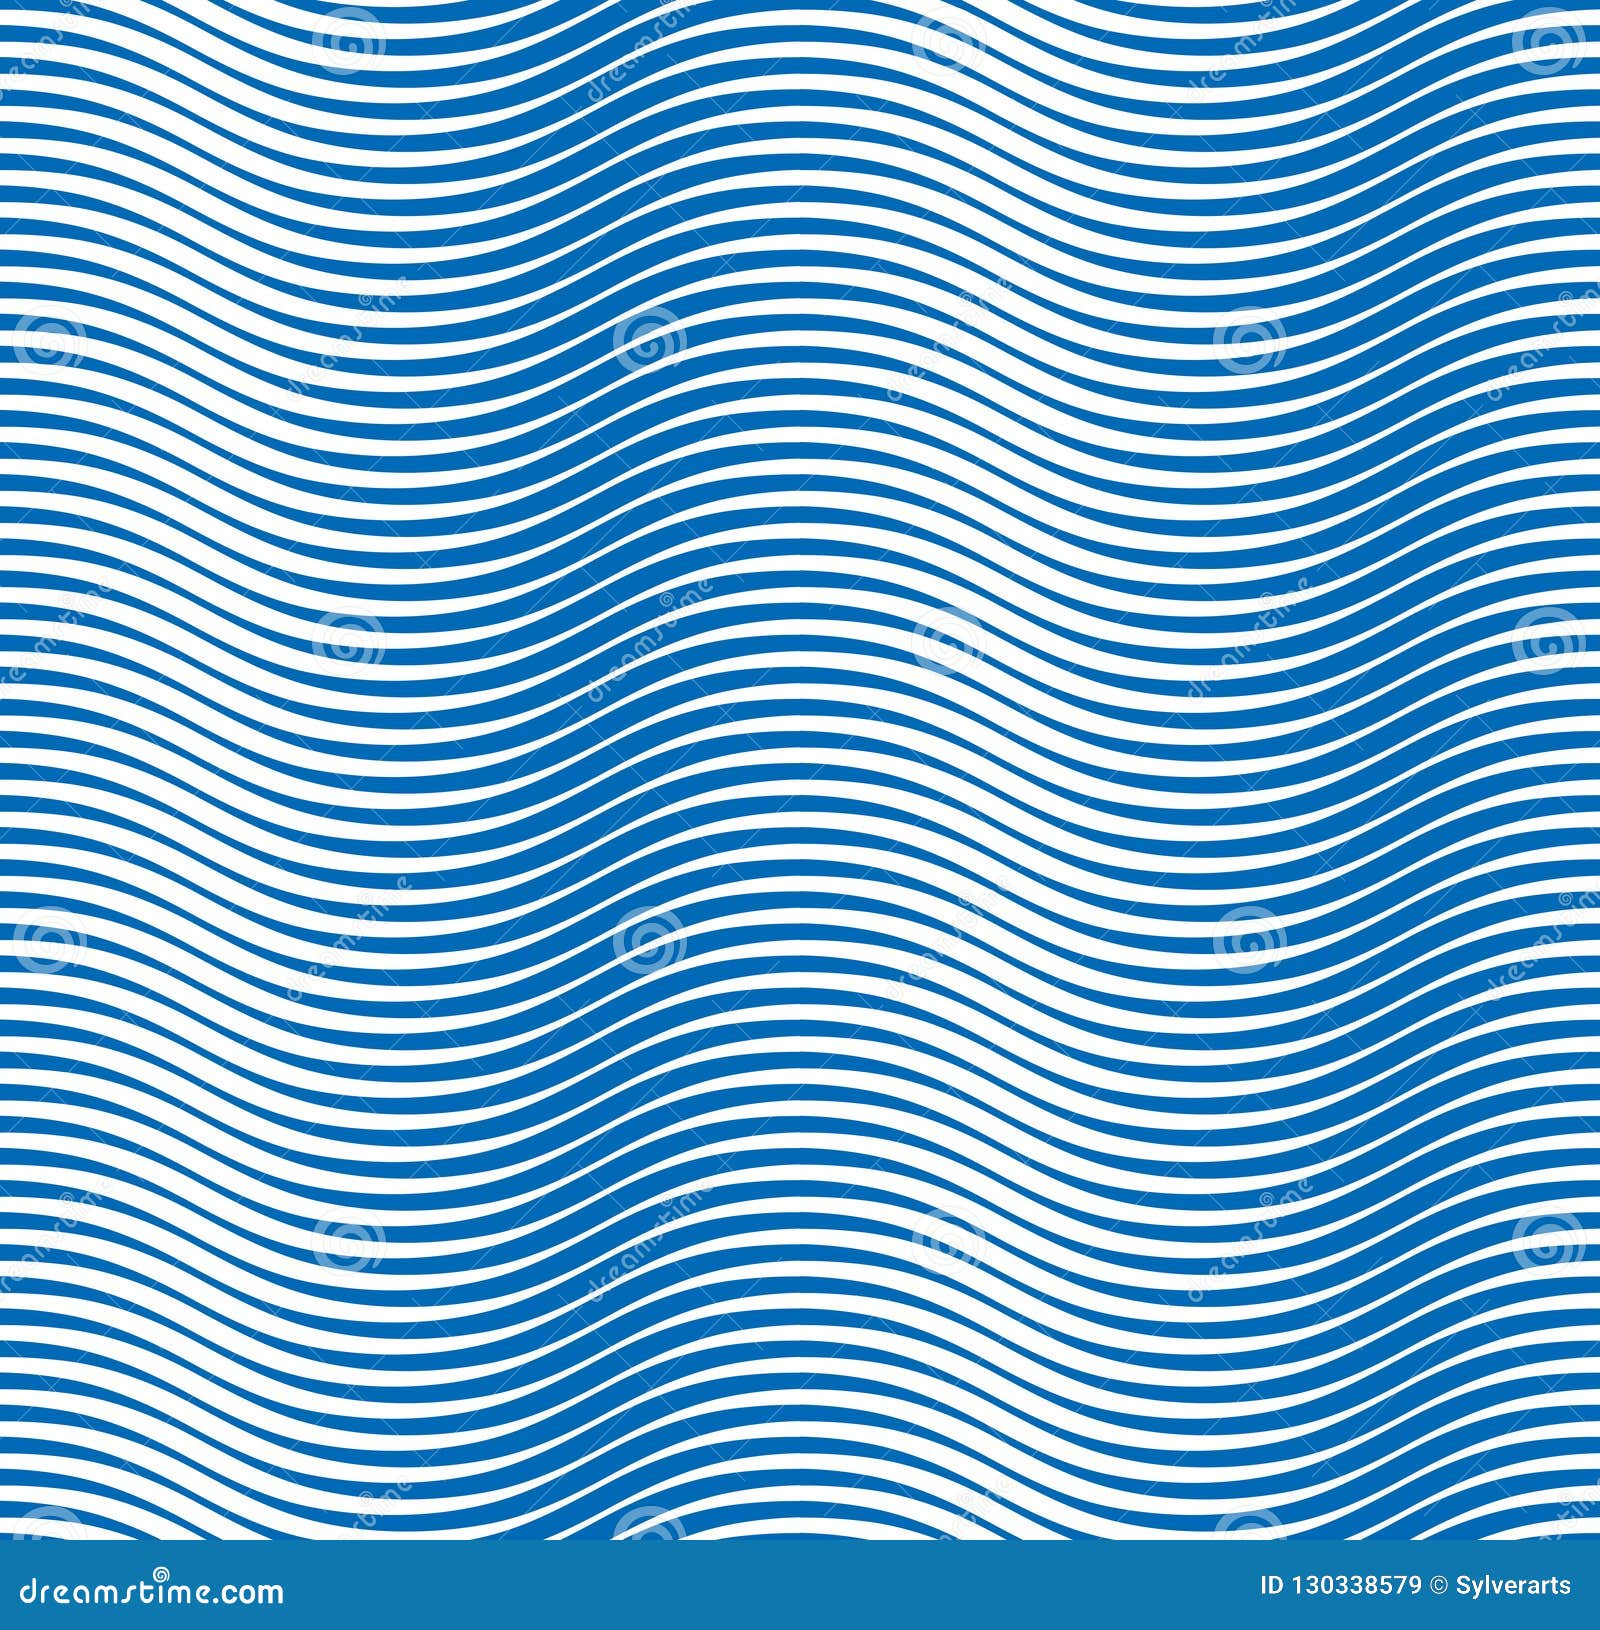 Water Waves Seamless Pattern, Vector Curve Lines Abstract Repeat Stock ...